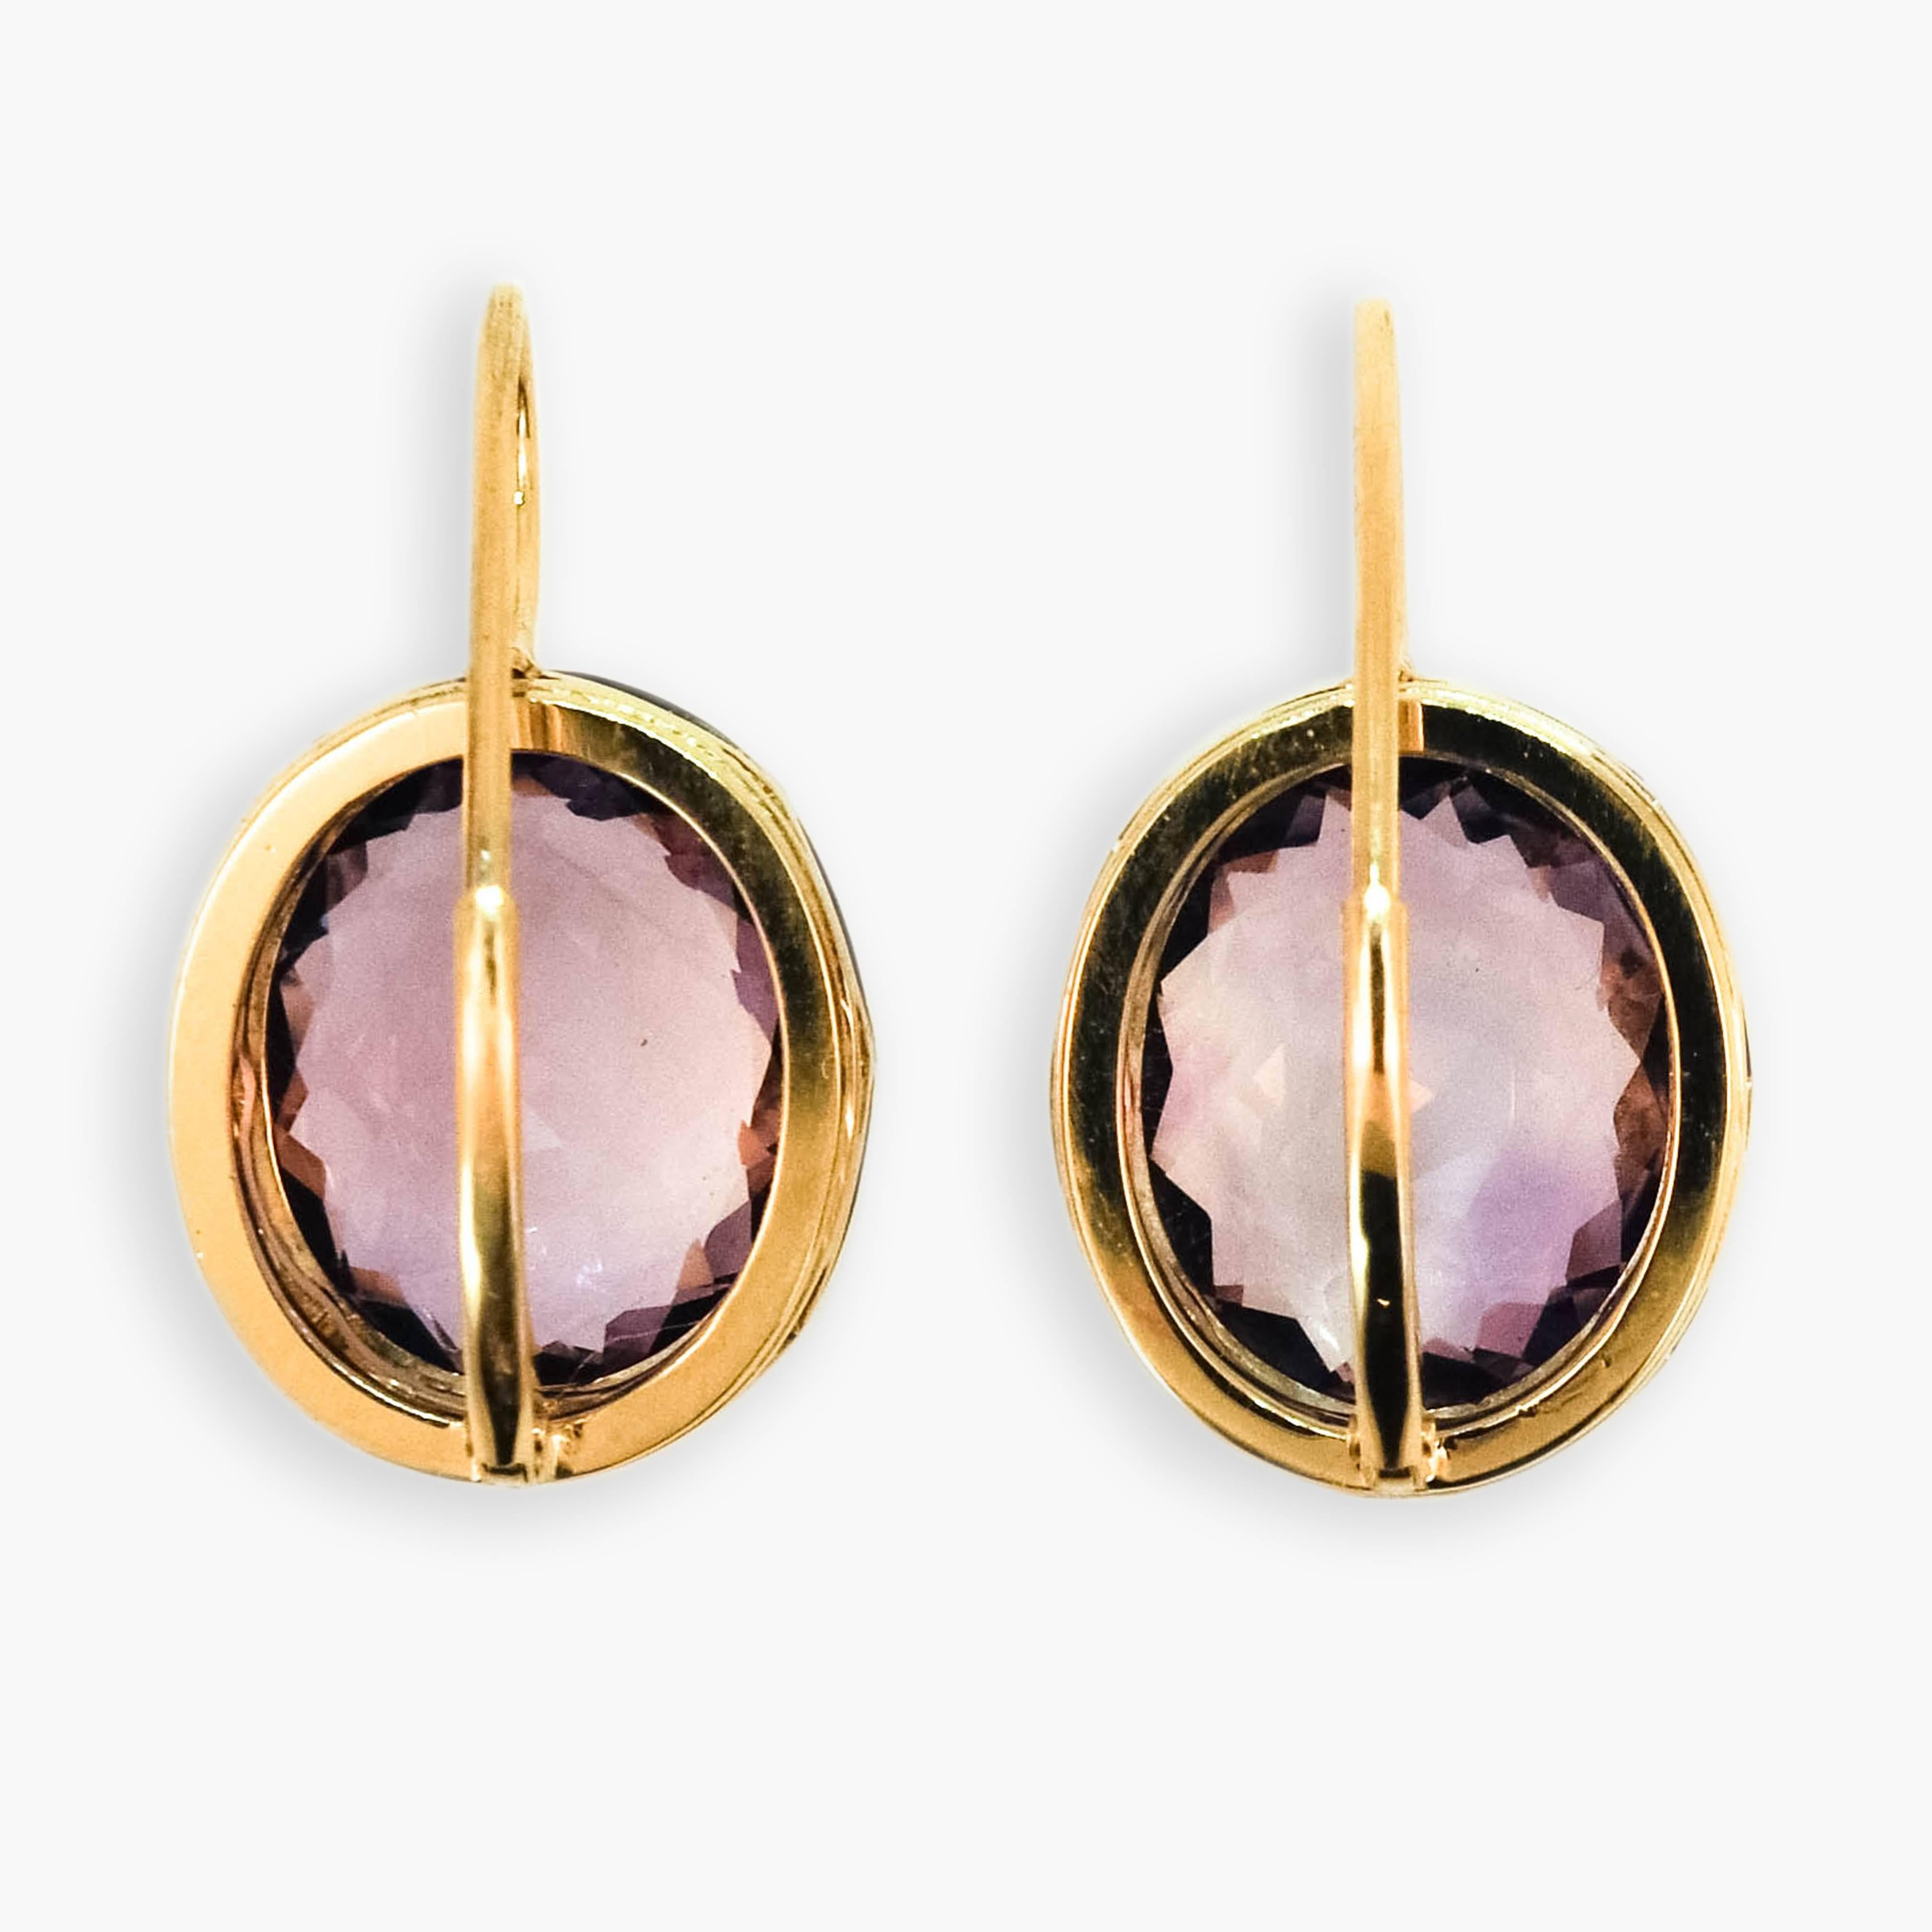 18 karat yellow gold and sterling silver on a wire earrings each set with one oval light lavender amethyst measuring approximately 14 x 12mm. 13.33 carats total weight. Leverbacks.